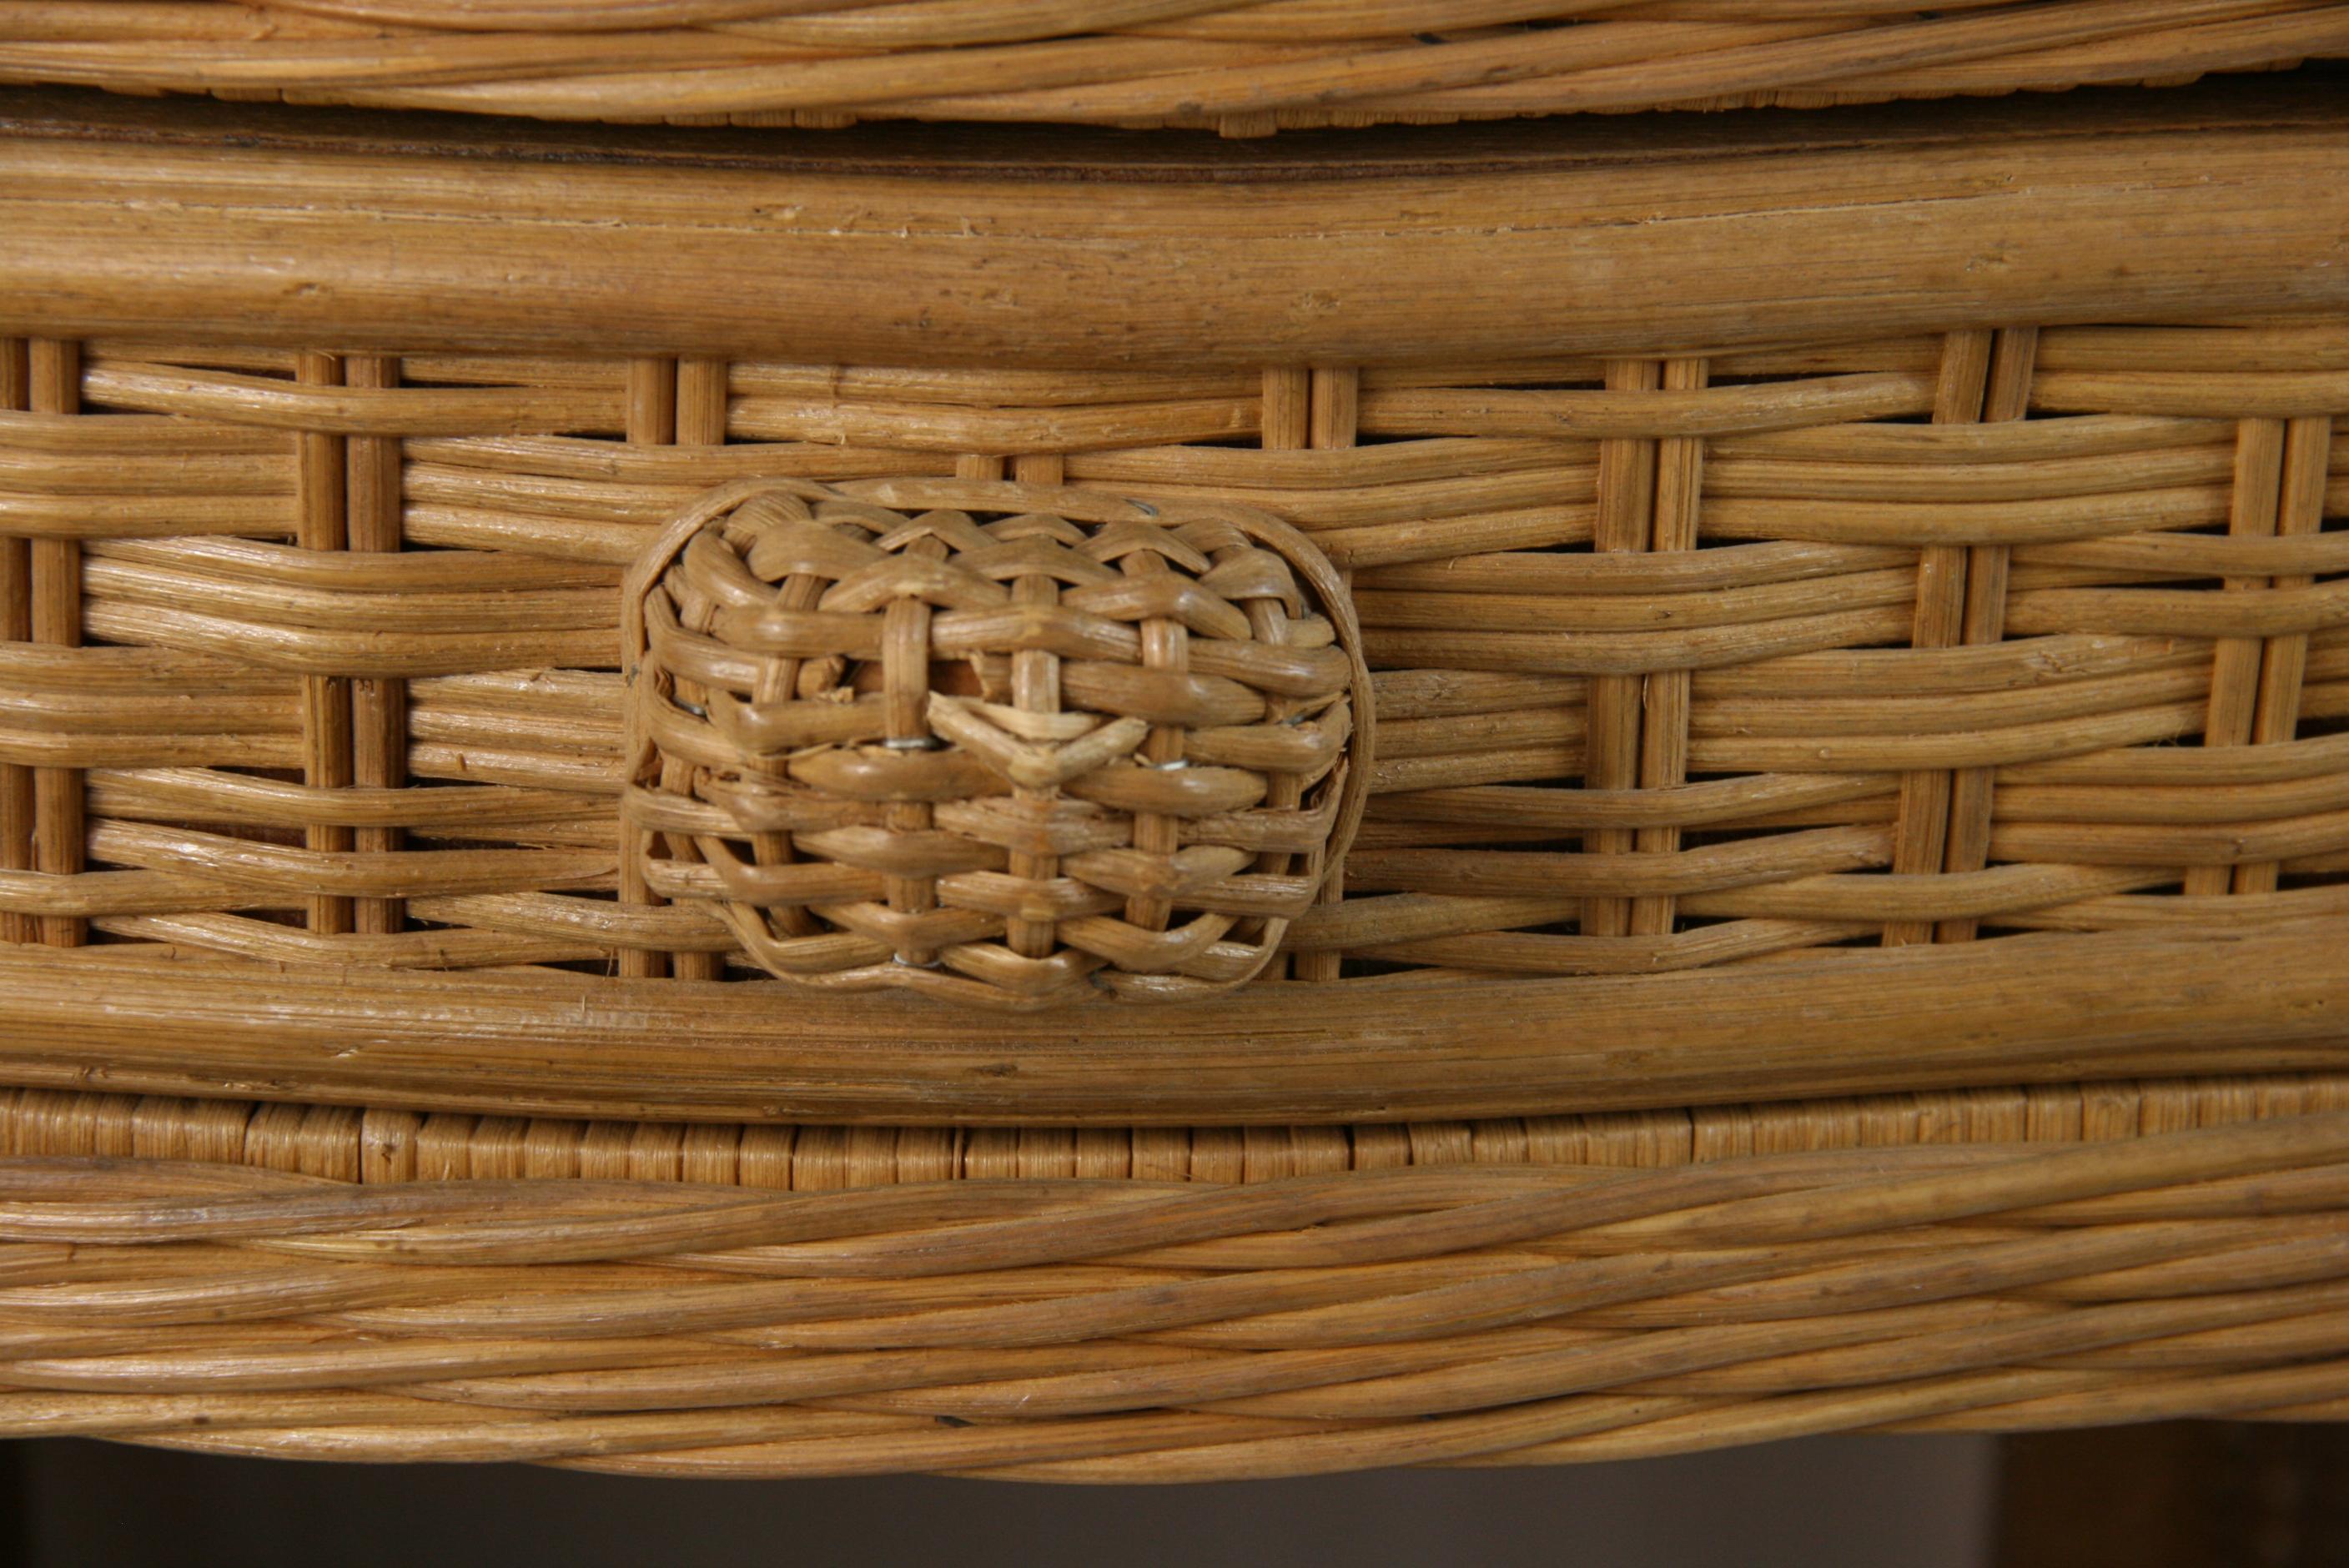 Late 20th Century Bed Side Table Rattan &Wicker  Attributed to Vivai Del Sud Italy 1970's For Sale